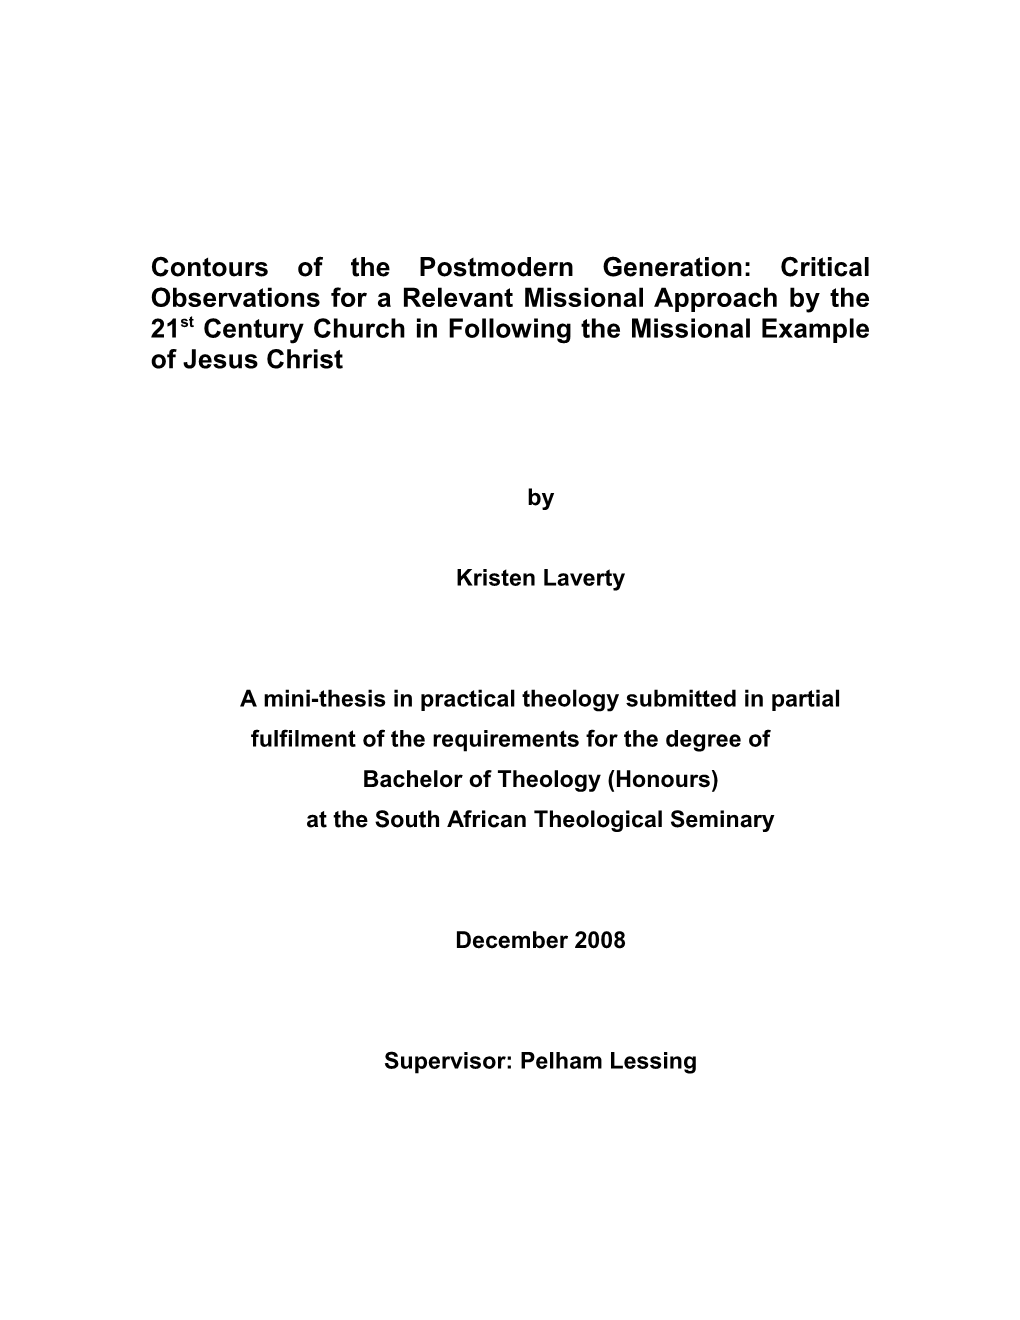 Contours of the Postmodern Generation: Critical Observations for a Relevant Missional Approach